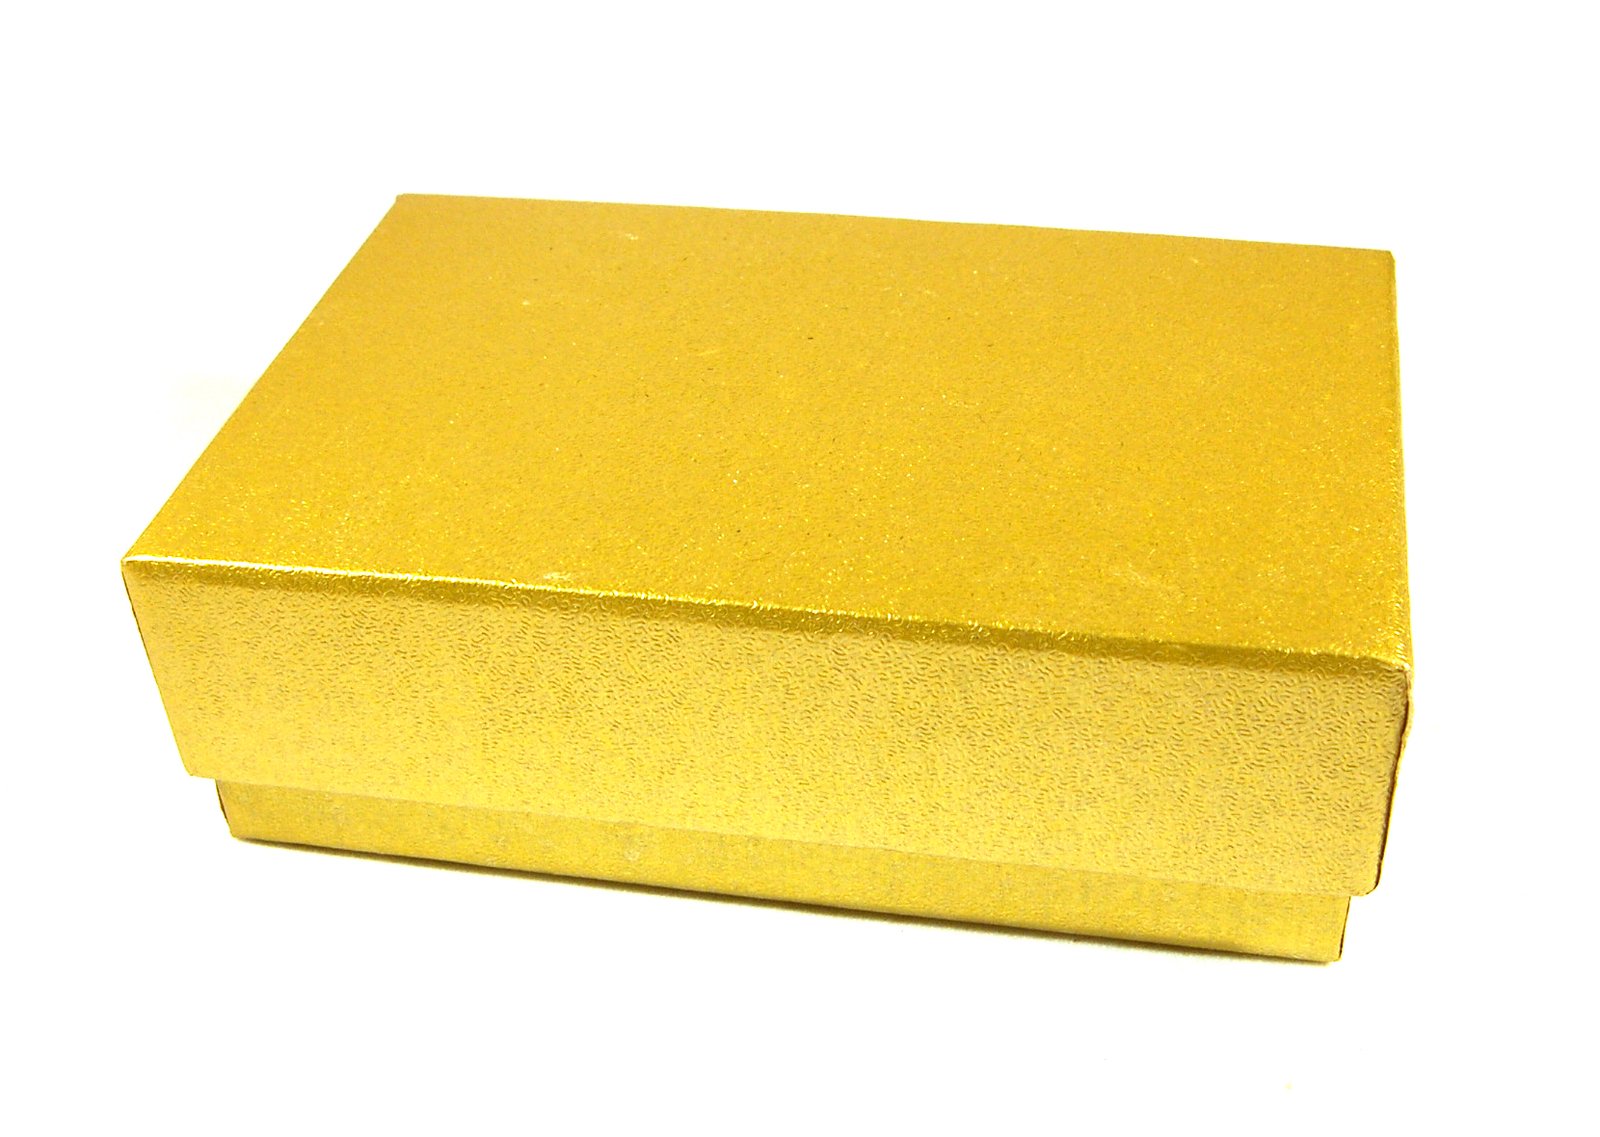 a bright yellow gift box, open and plain